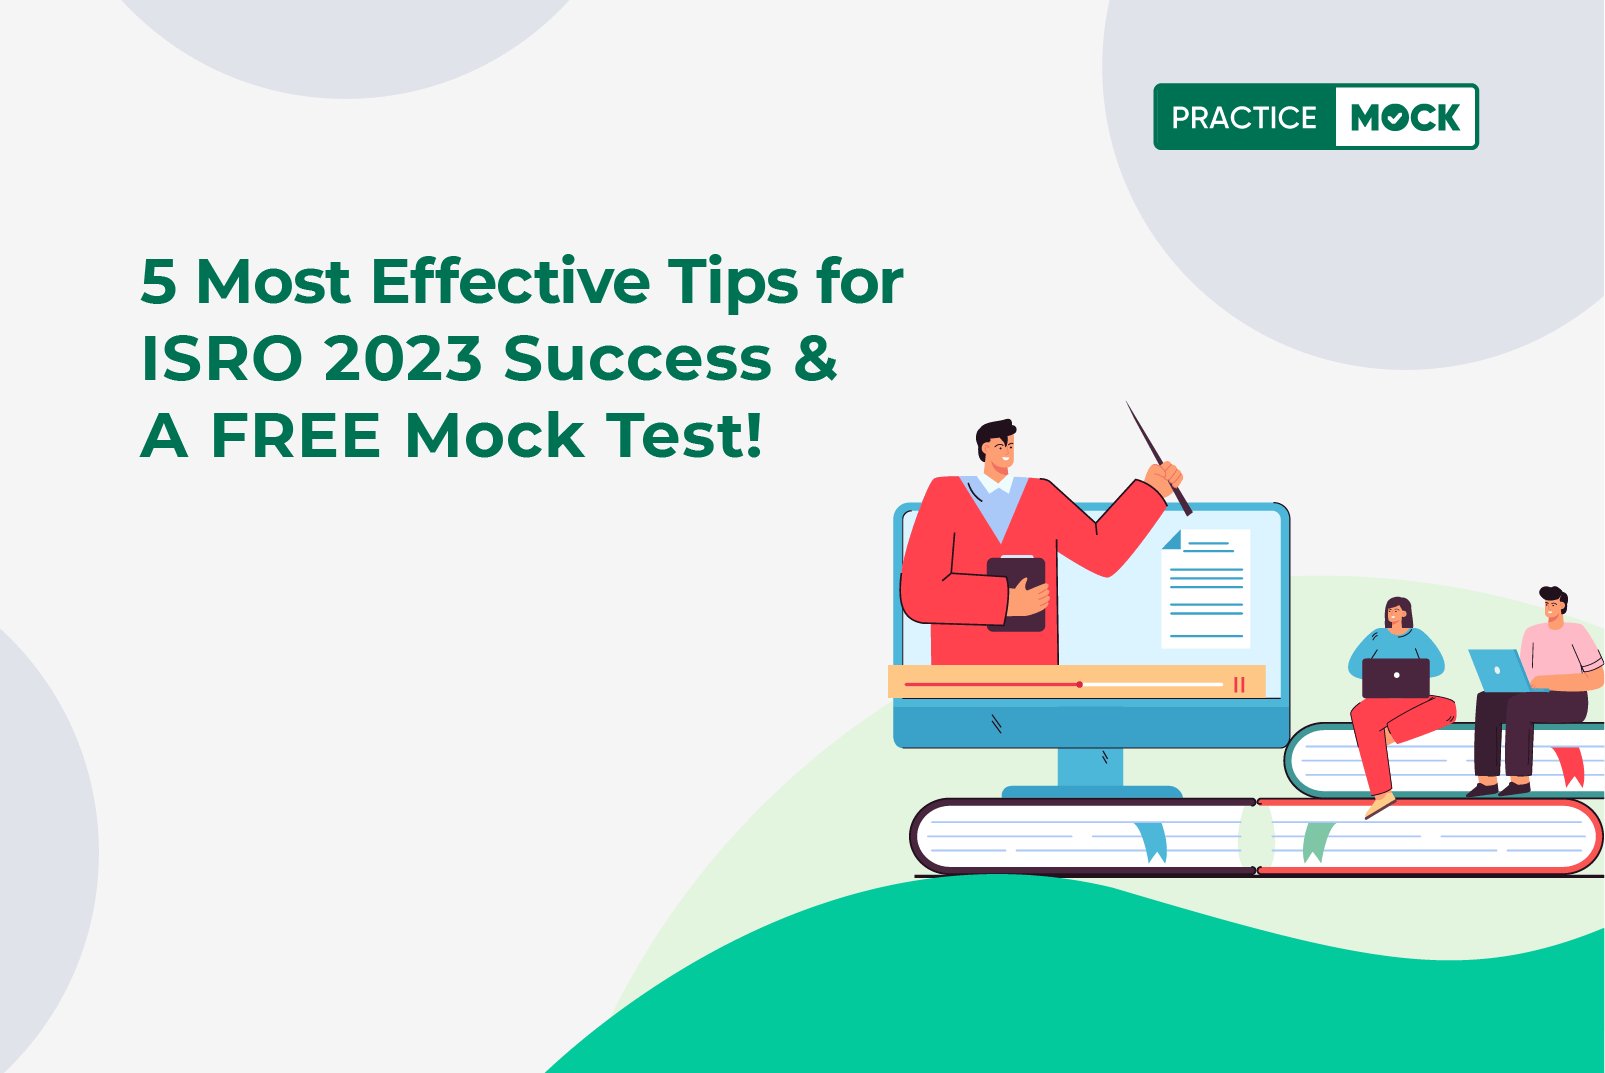 5 Most Effective Tips for ISRO 2023 Success & a FREE Mock Test!